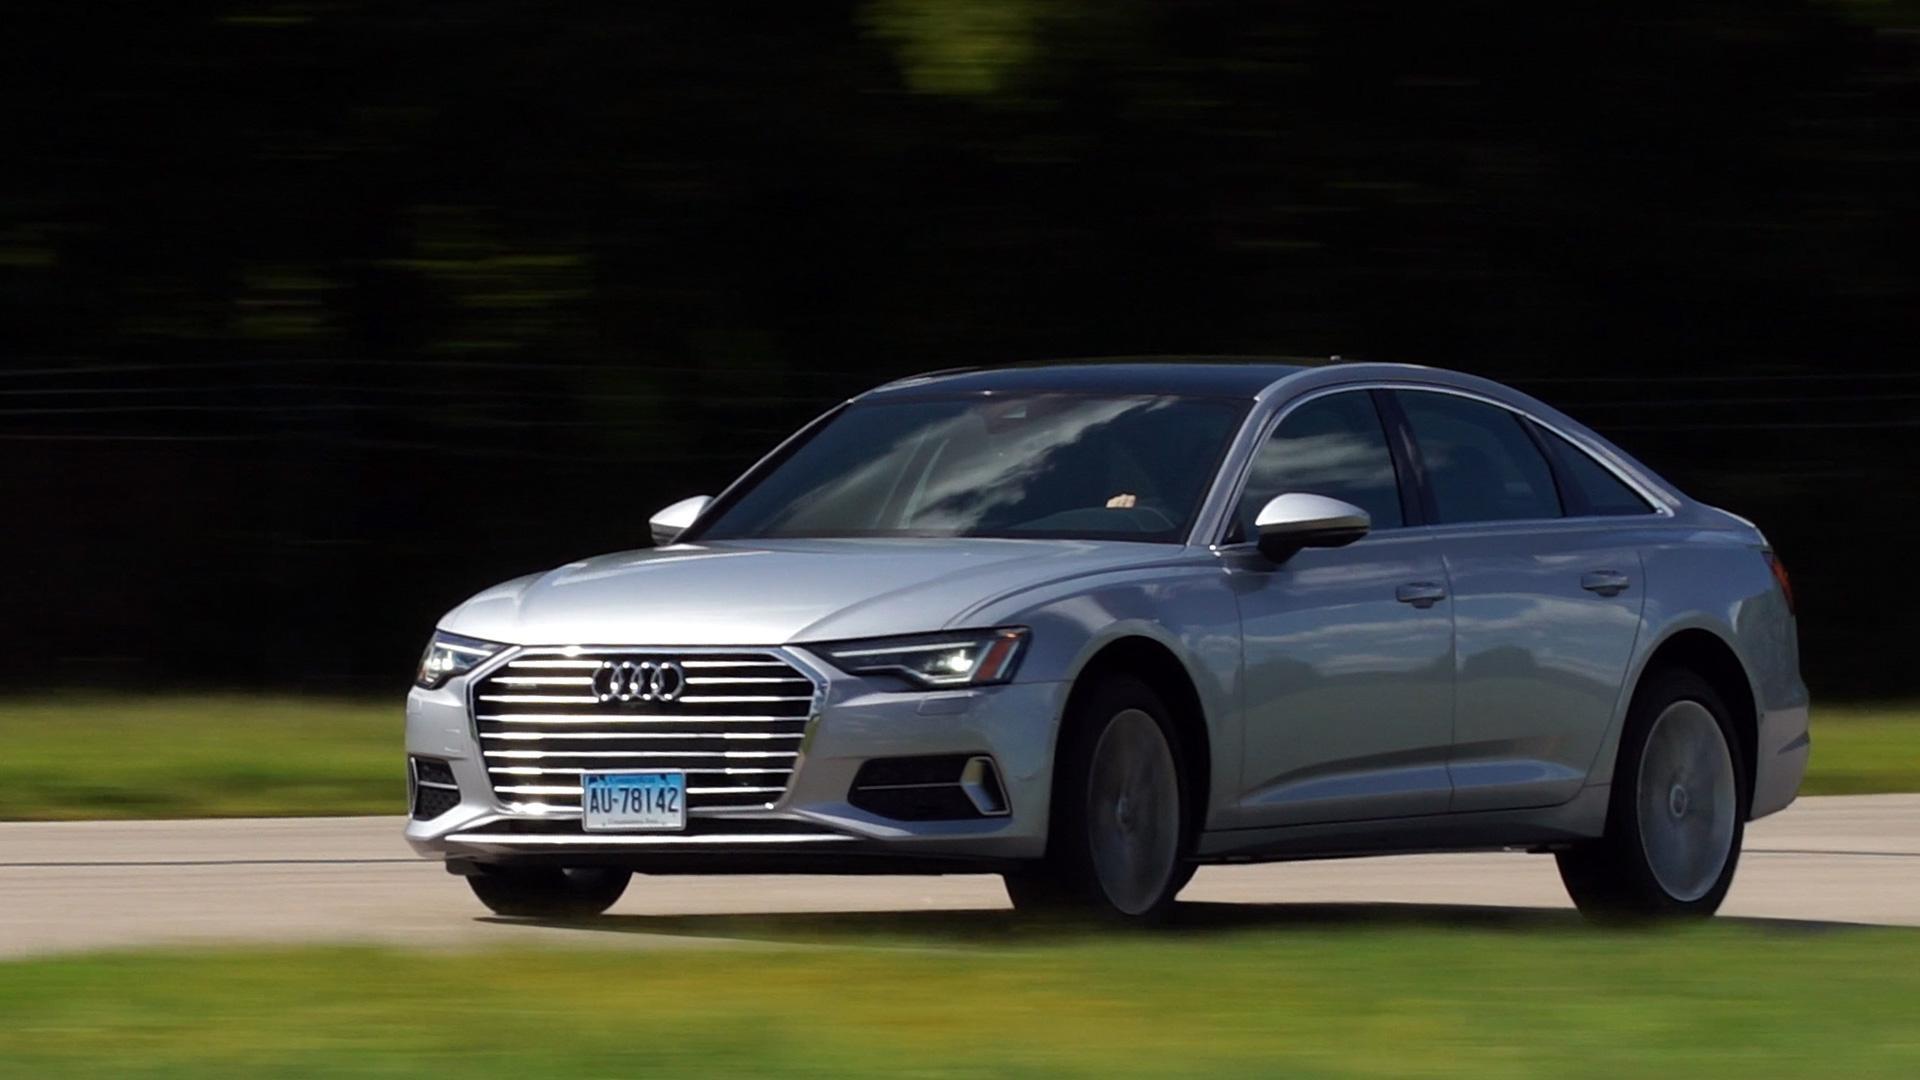 2020 Audi A6 Review, Pricing, and Specs